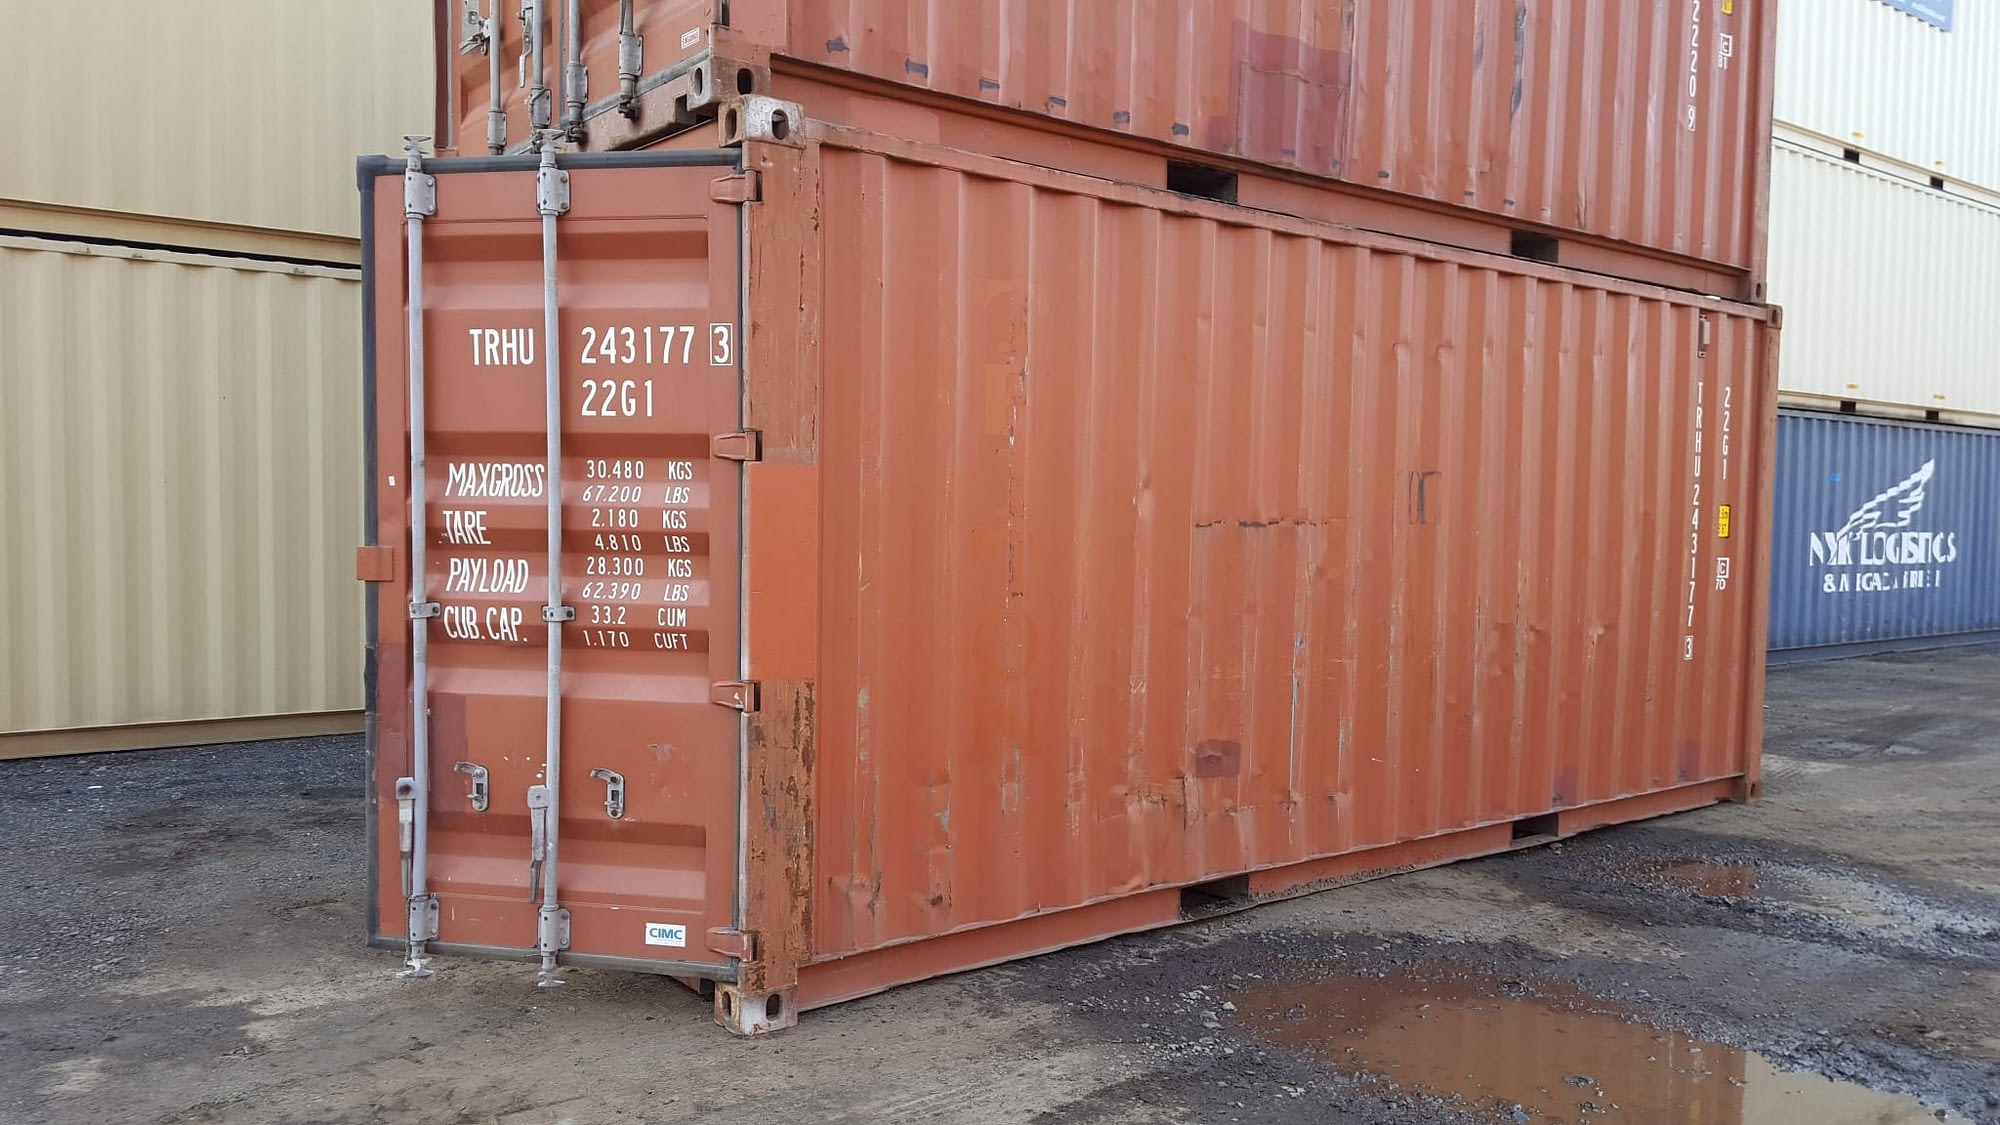 Buy or rent a TRS functional less expensive 20ft container.